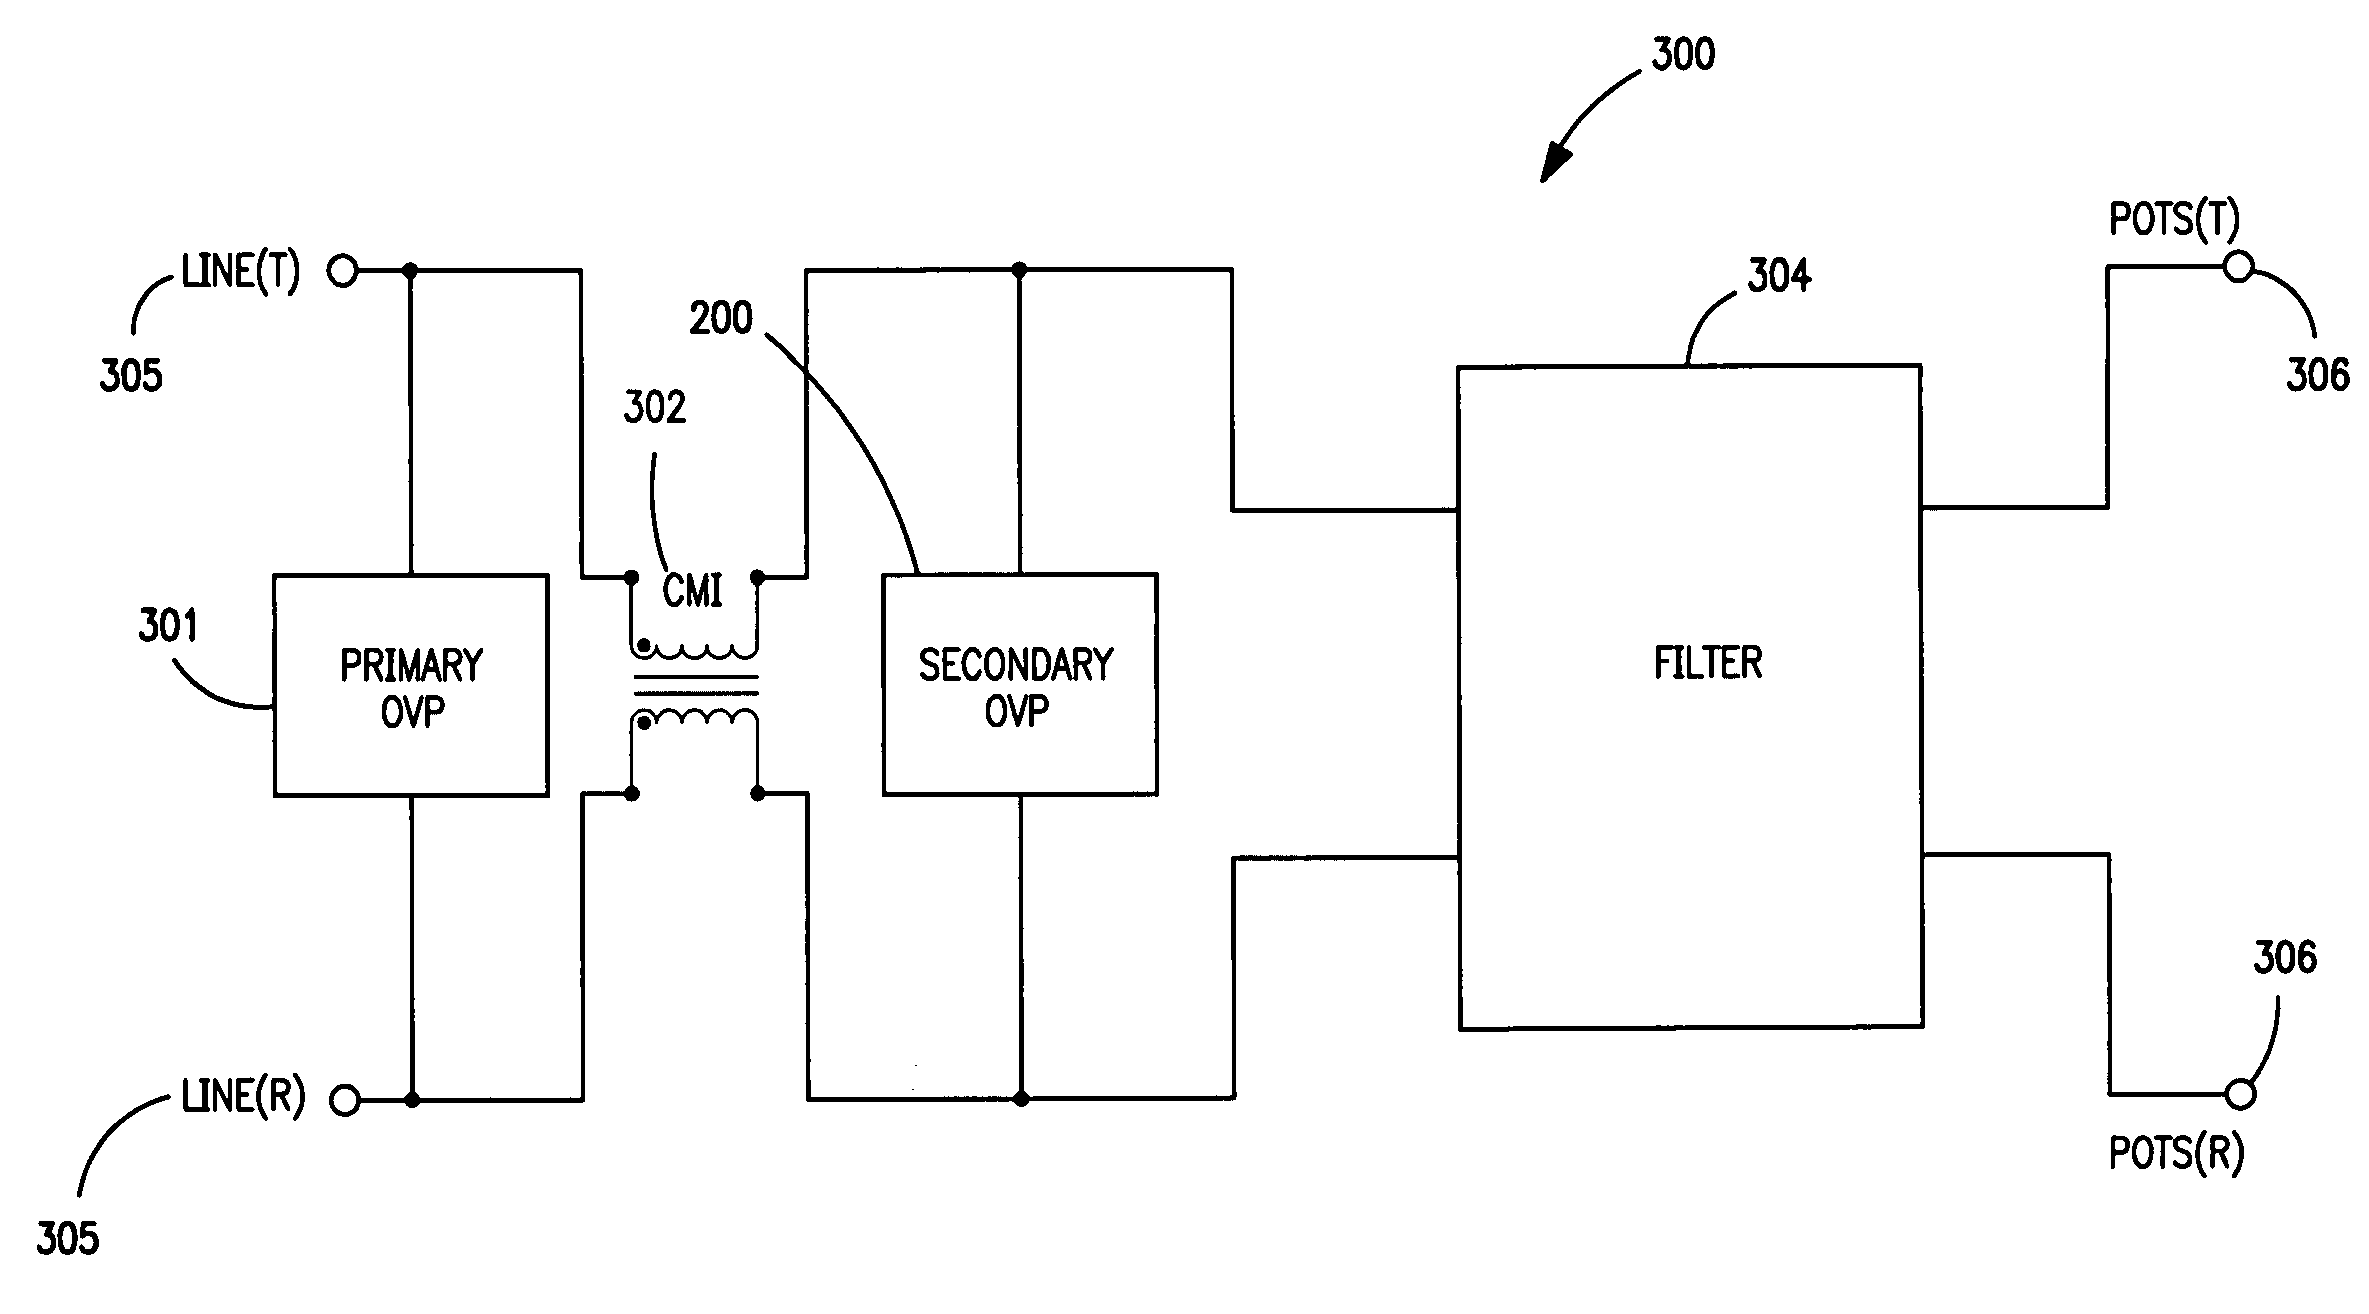 Surge protection apparatus and methods